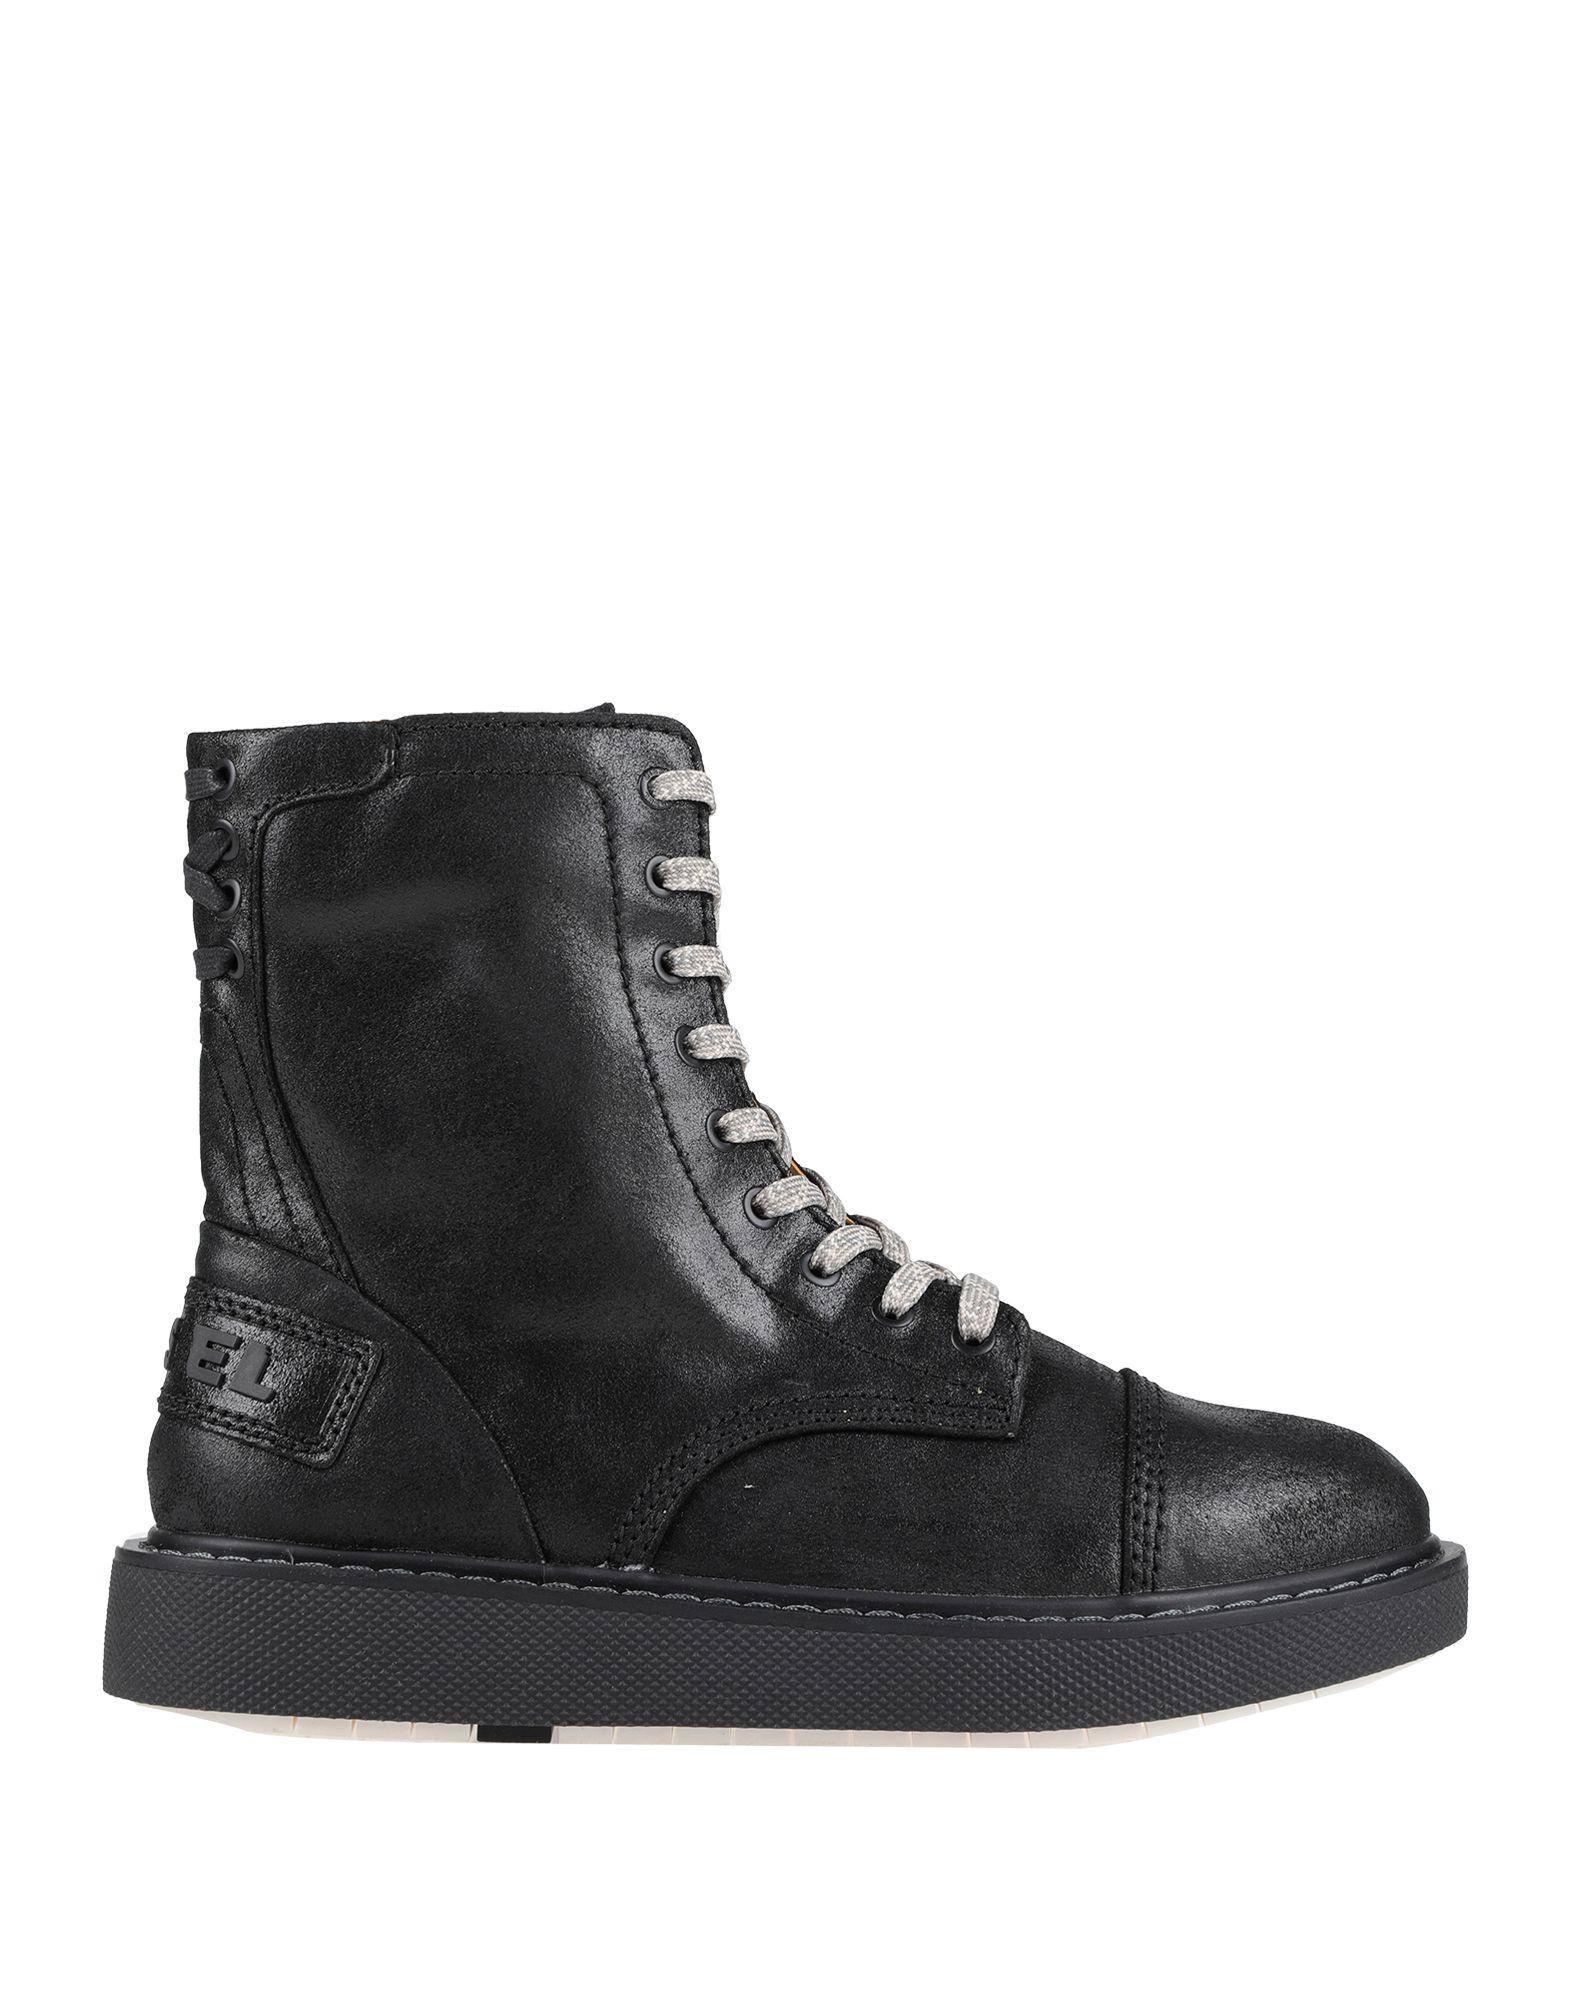 DIESEL Leather Ankle Boots in Black for Men - Lyst